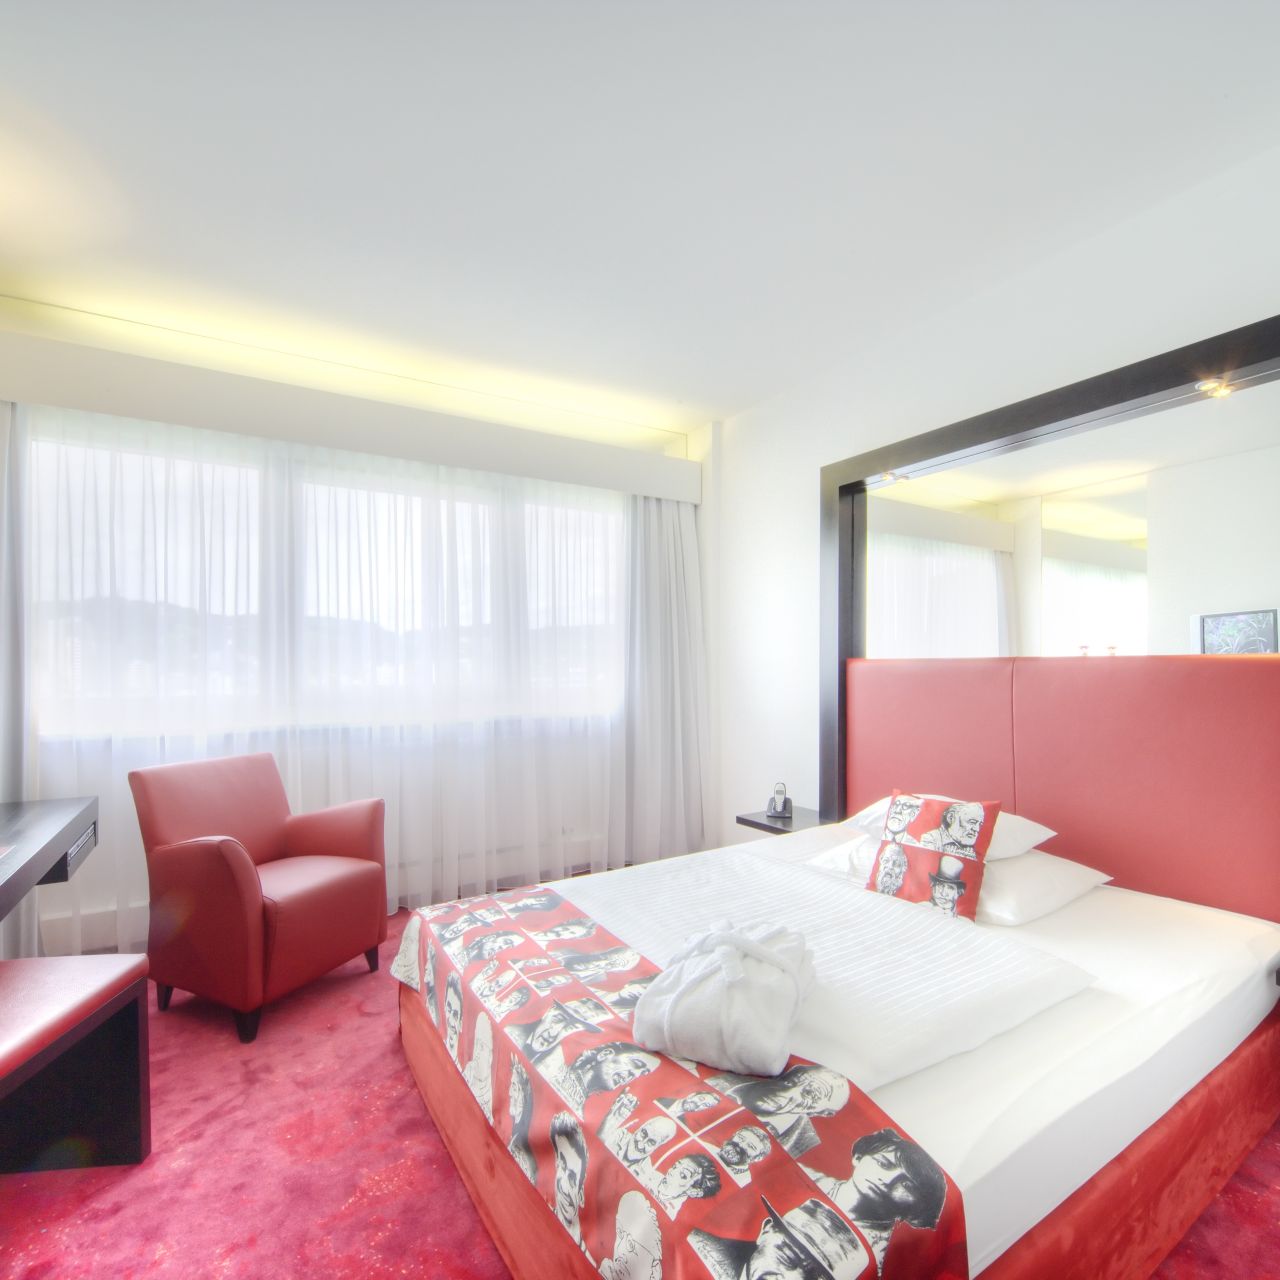 Hotel Arcotel Nike - Linz - Great prices at HOTEL INFO